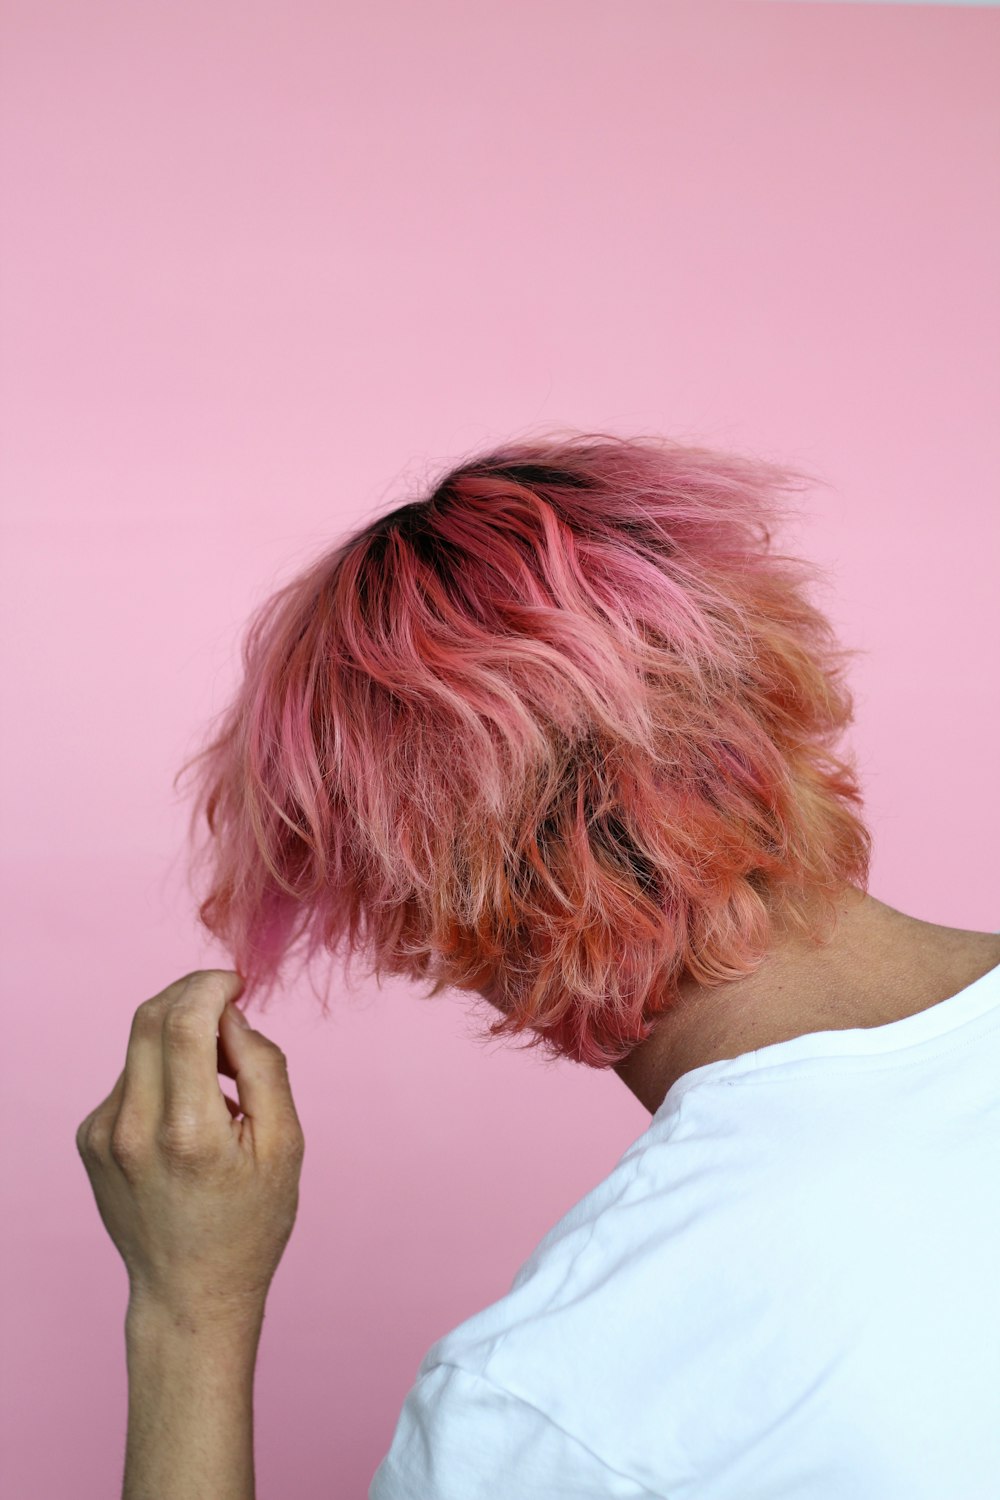 person in white top touch hair with pink dye photo – Free Hair Image on  Unsplash